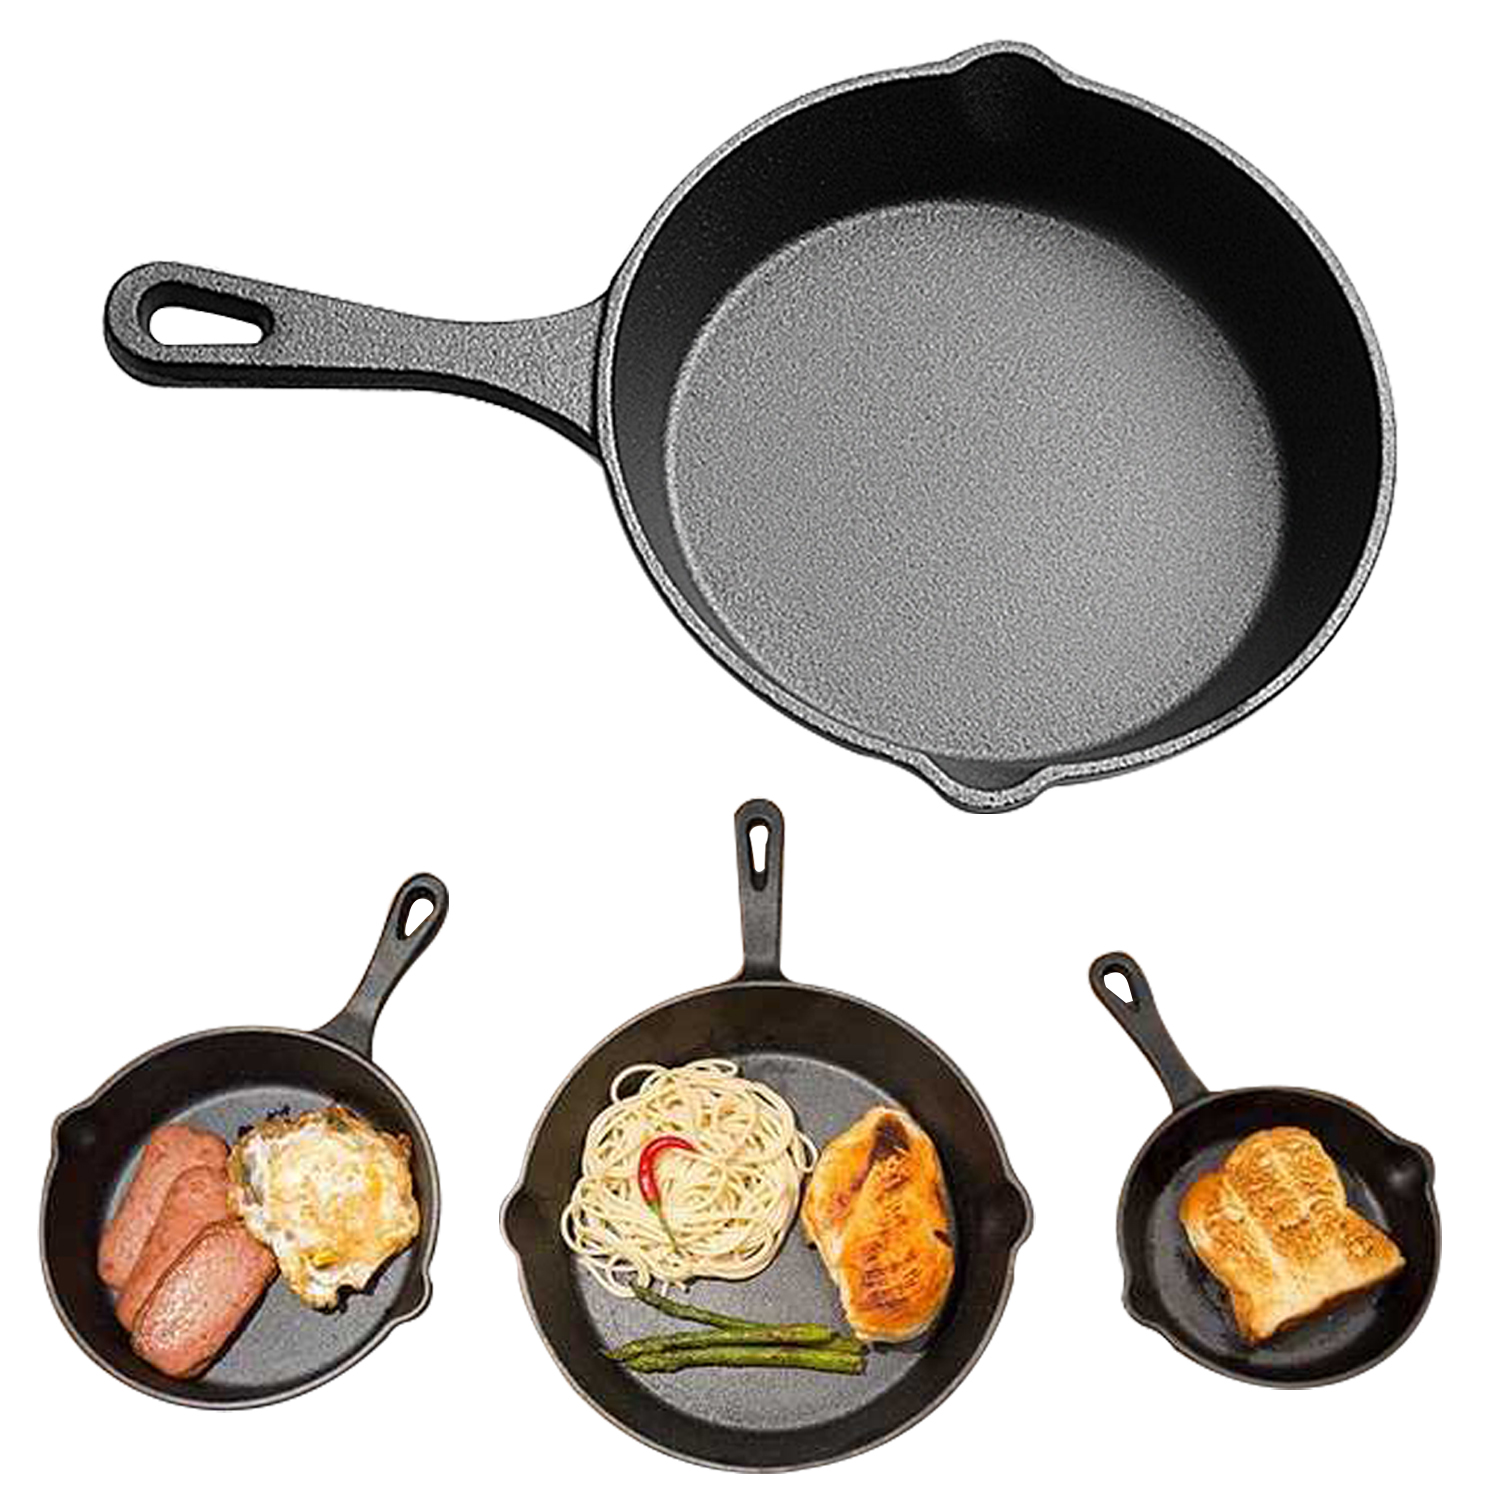 Cast Iron Frying Pan Oven Safe Cast Iron Skillet Cast Iron Grill Pan Non-stick Cookware with Side Drip Lips For Electric Stovetop & Oven 8", 10", 12 Inch